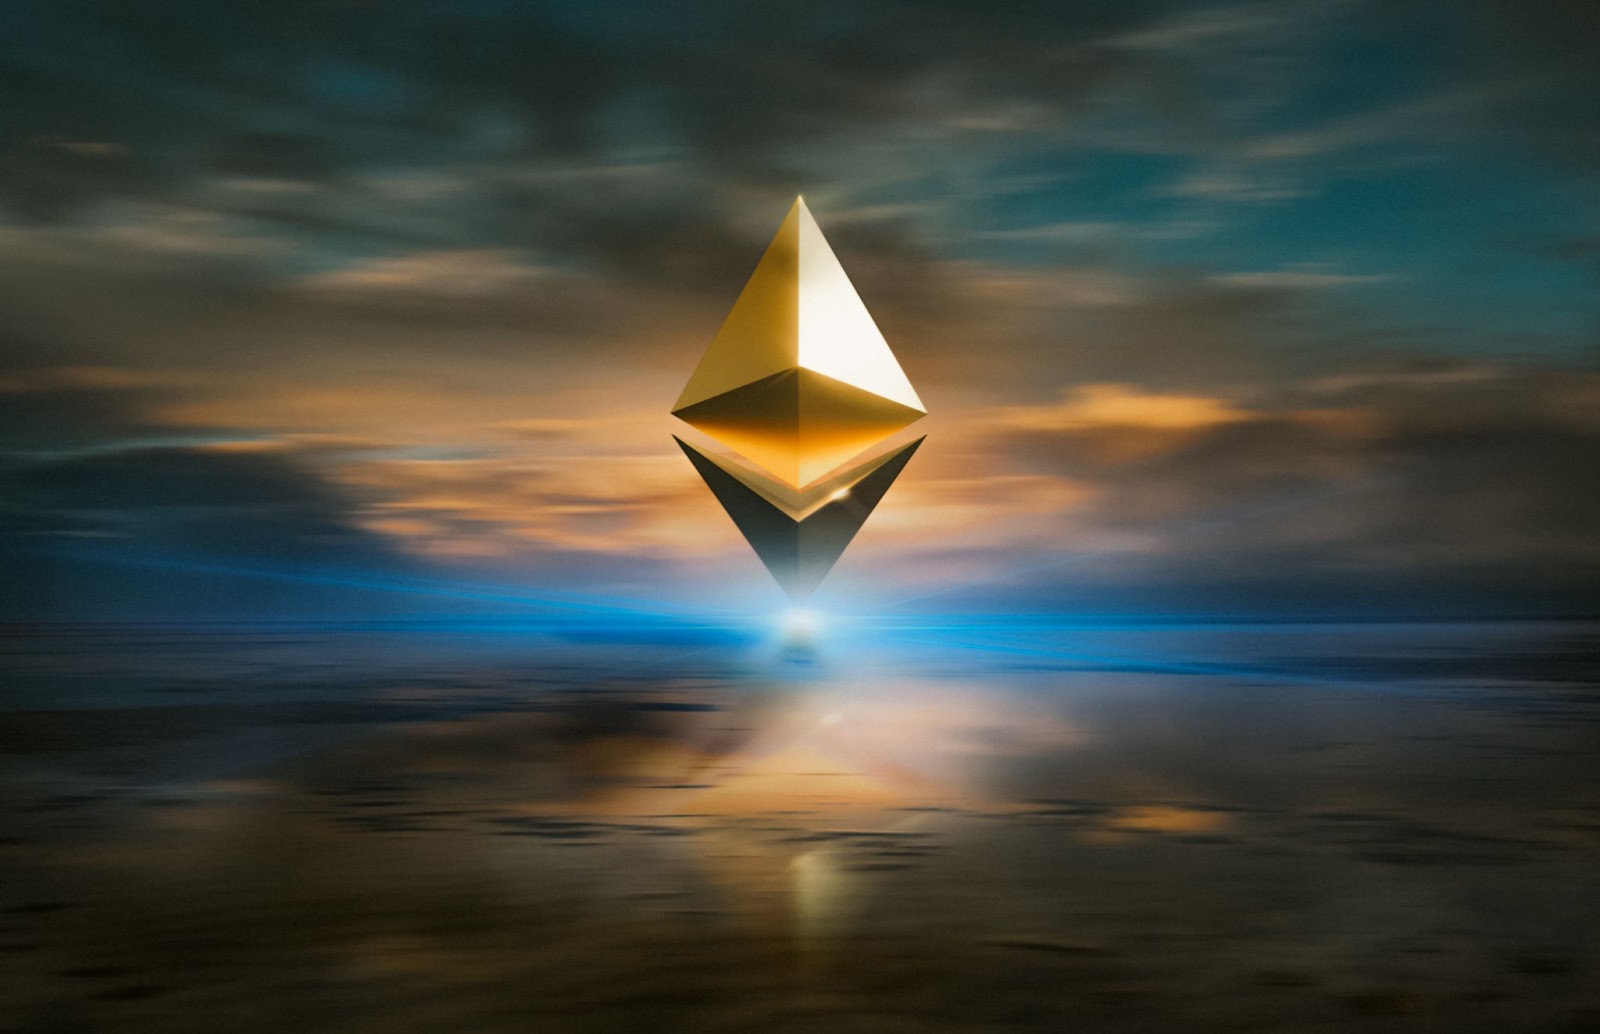 Golden Ethereum symbol suspended in mid-air on a dusky, cloudy landscape background.